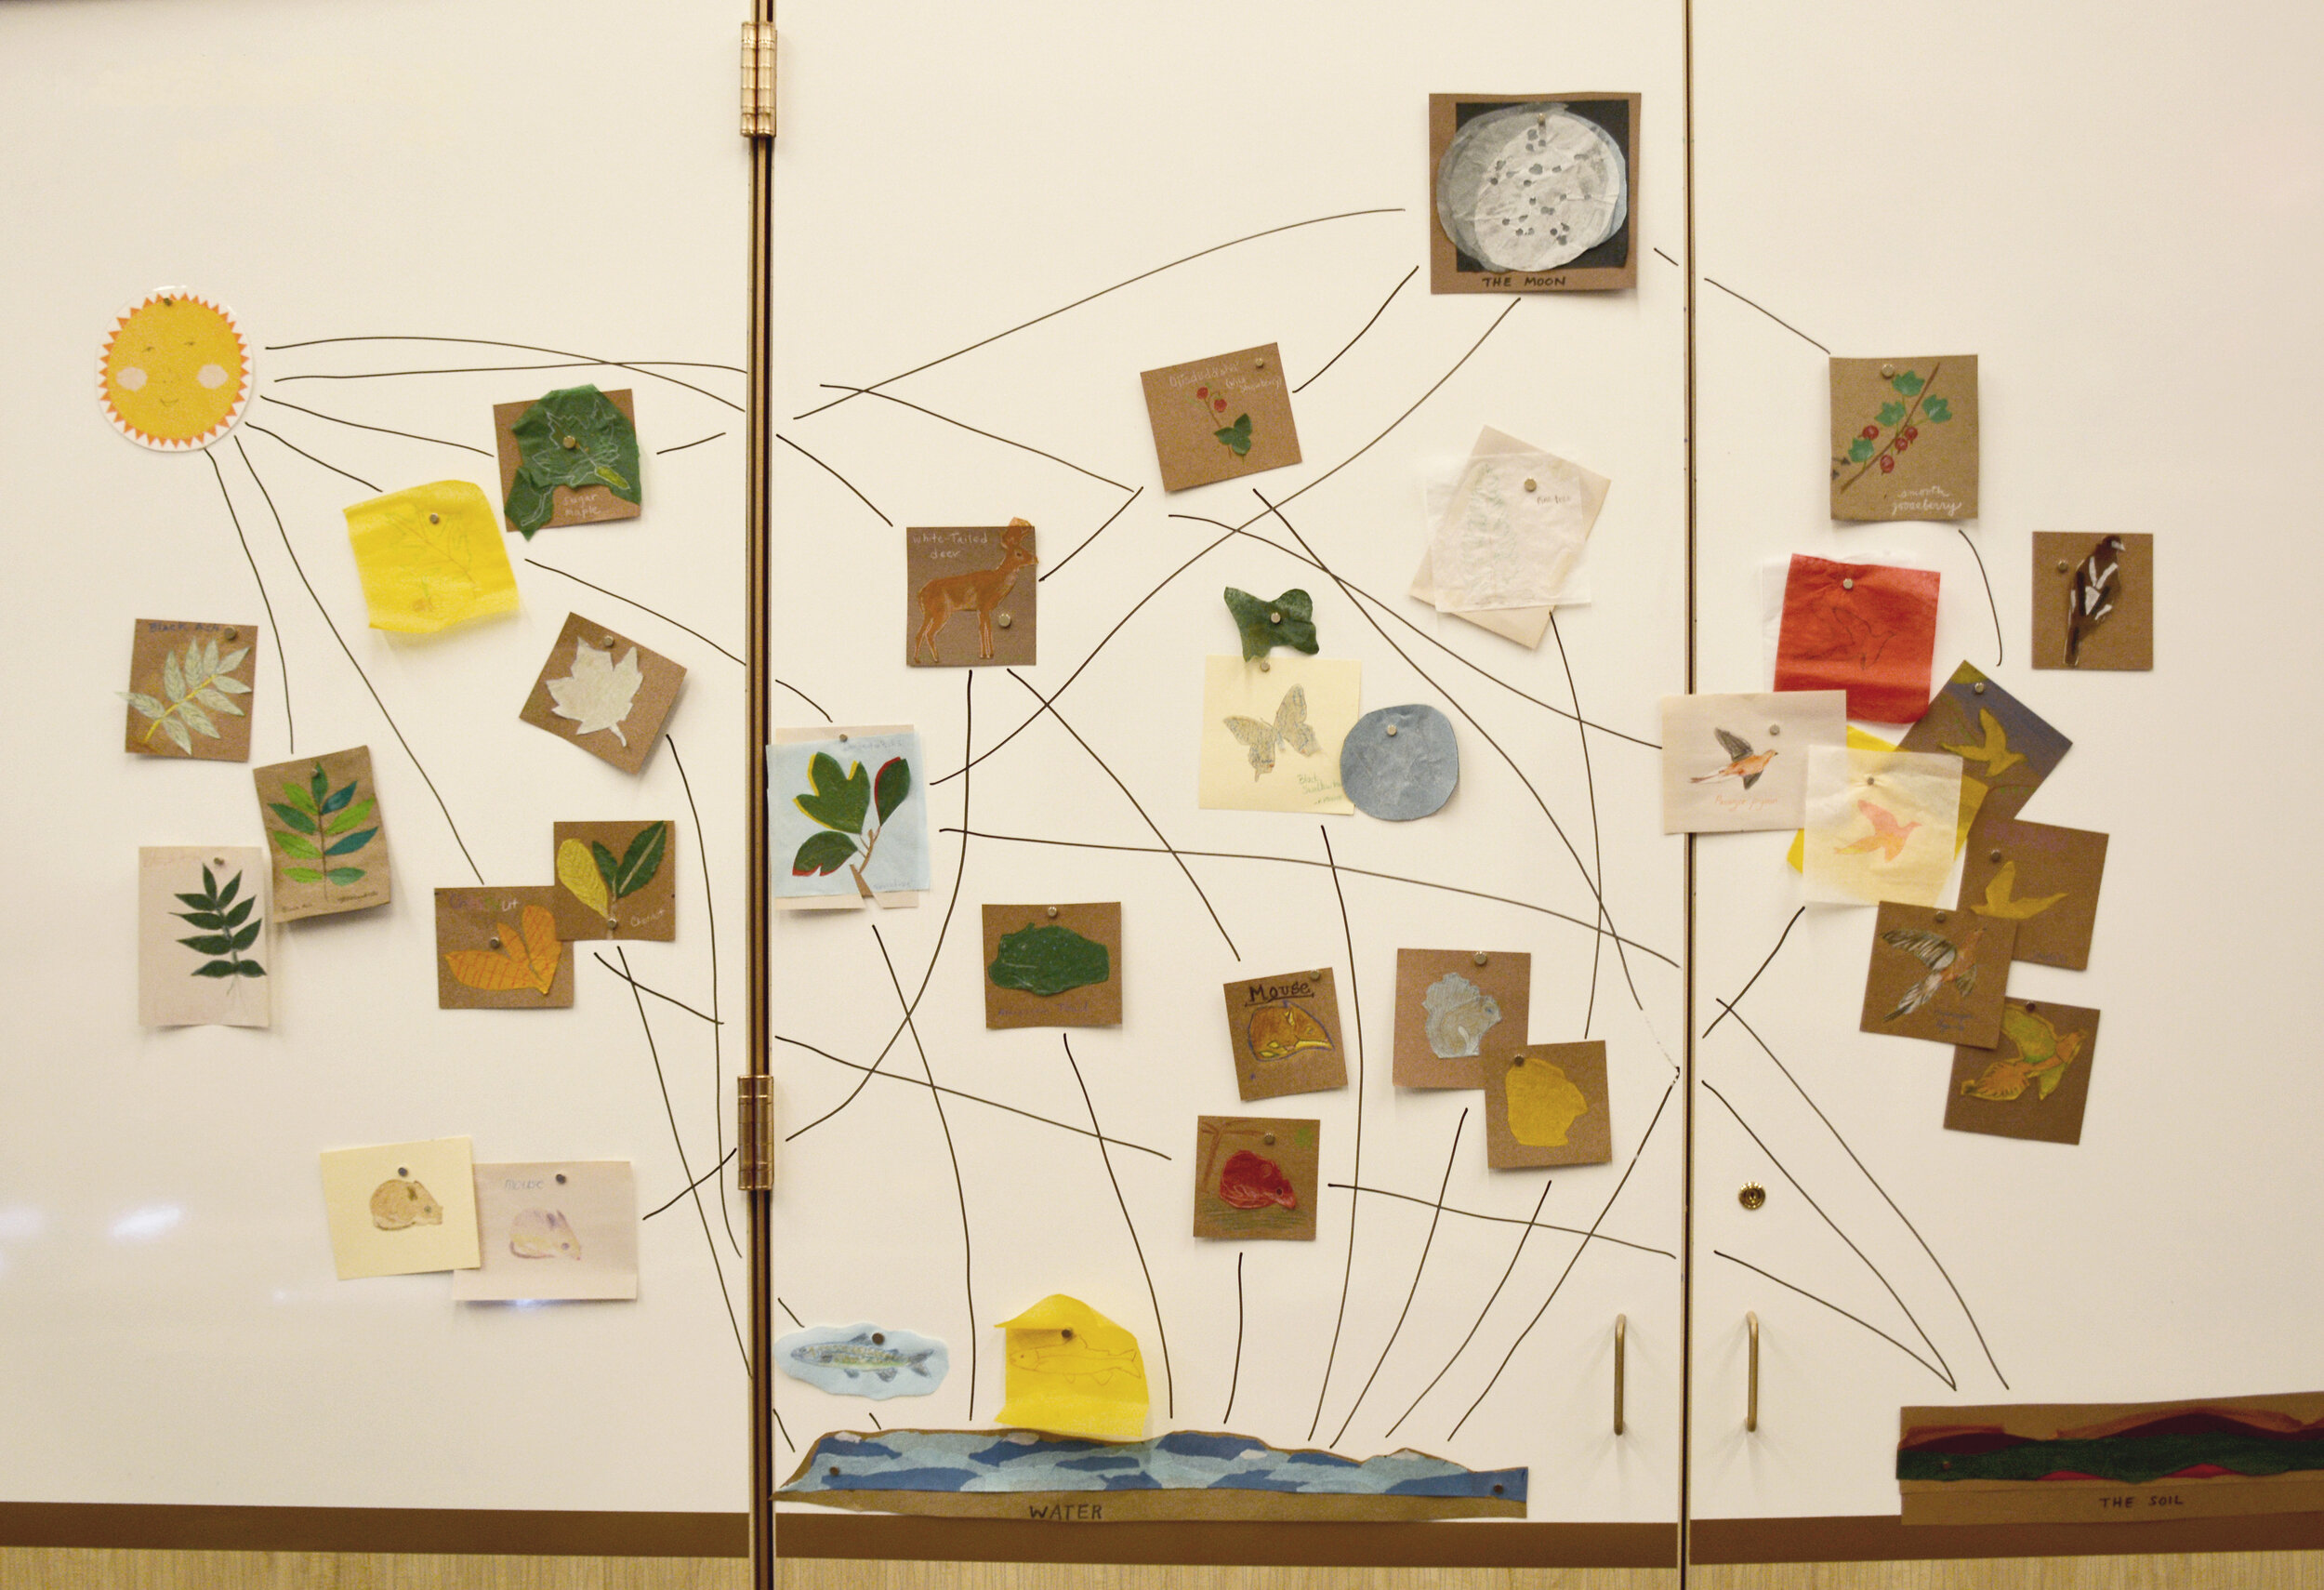 Web of Life activity at the National Museum of the American Indian